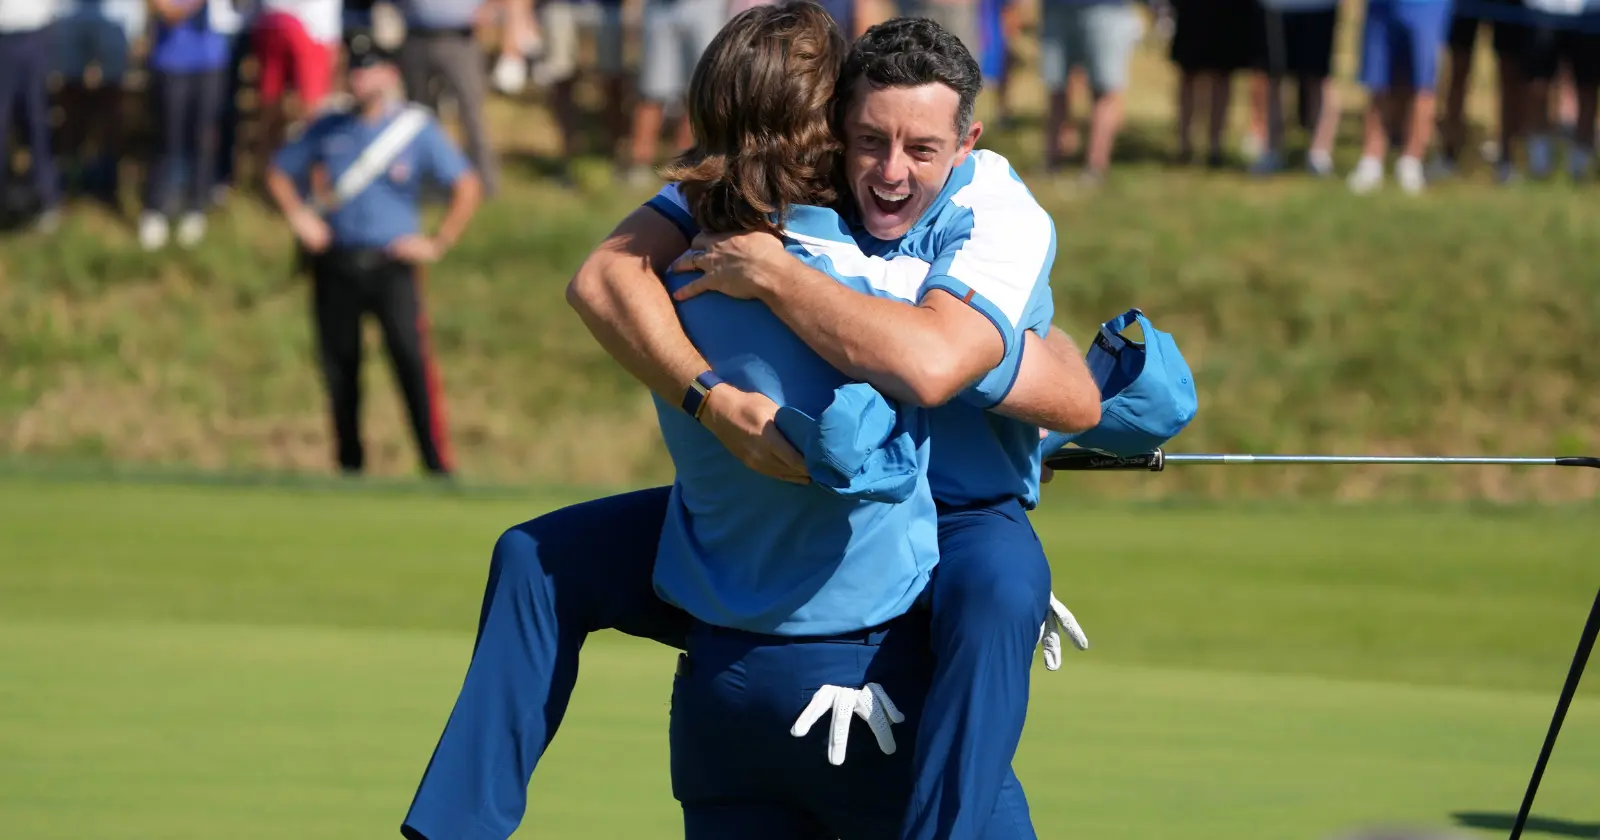 European Team Dominates Ryder Cup Opener in Italy